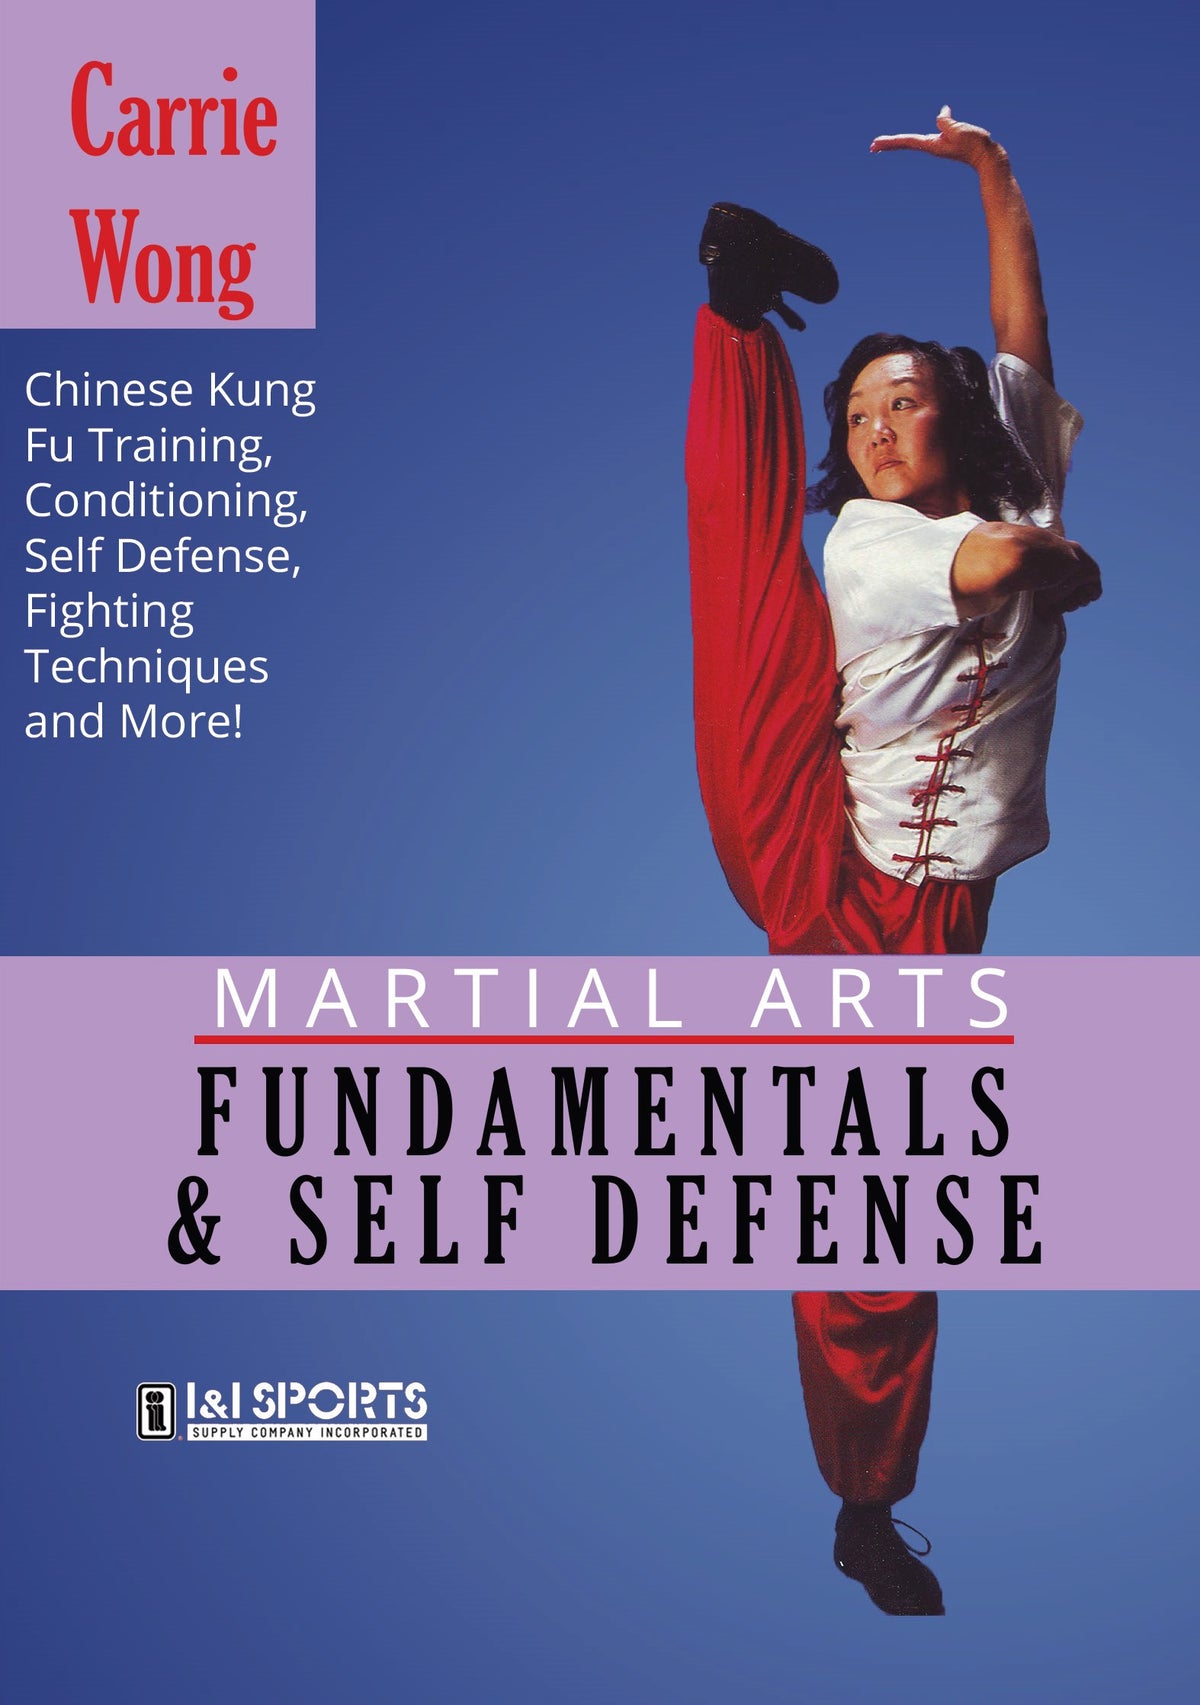 Martial Arts Fundamentals & Self Defense, Kung Fu Fighting DVD Carrie Wong